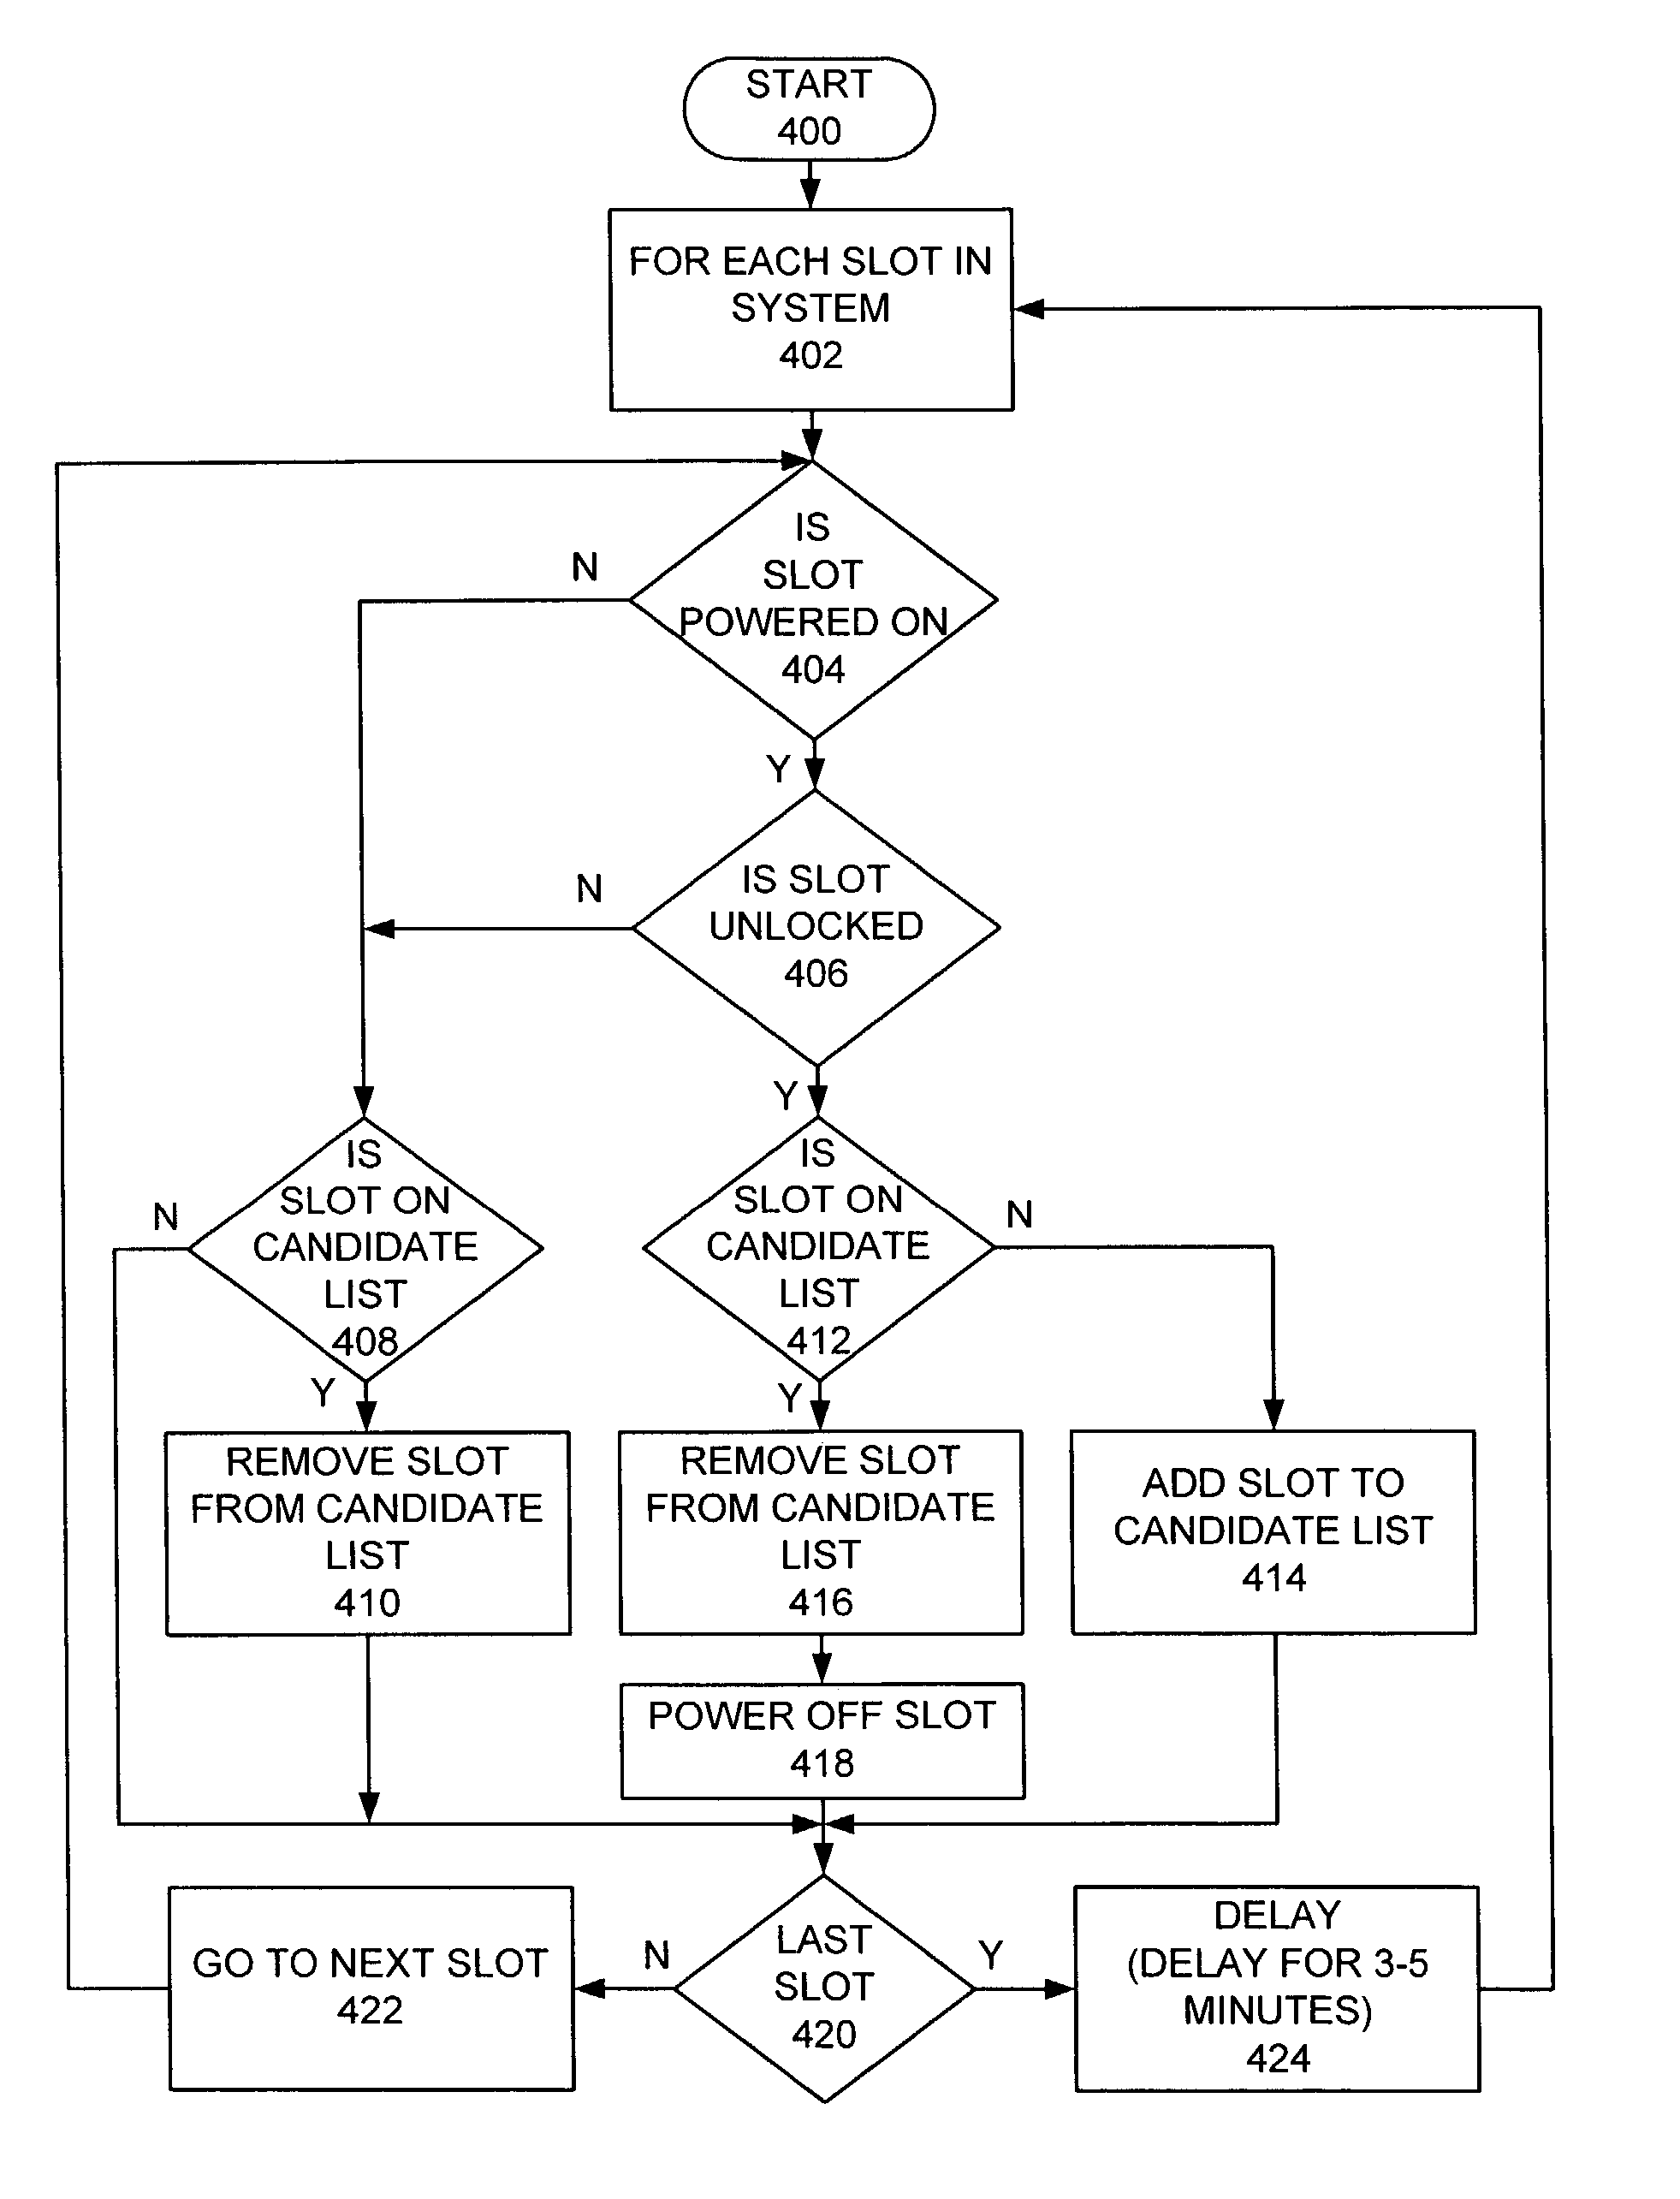 Method for detecting and powering off unused I/O slots in a computer system